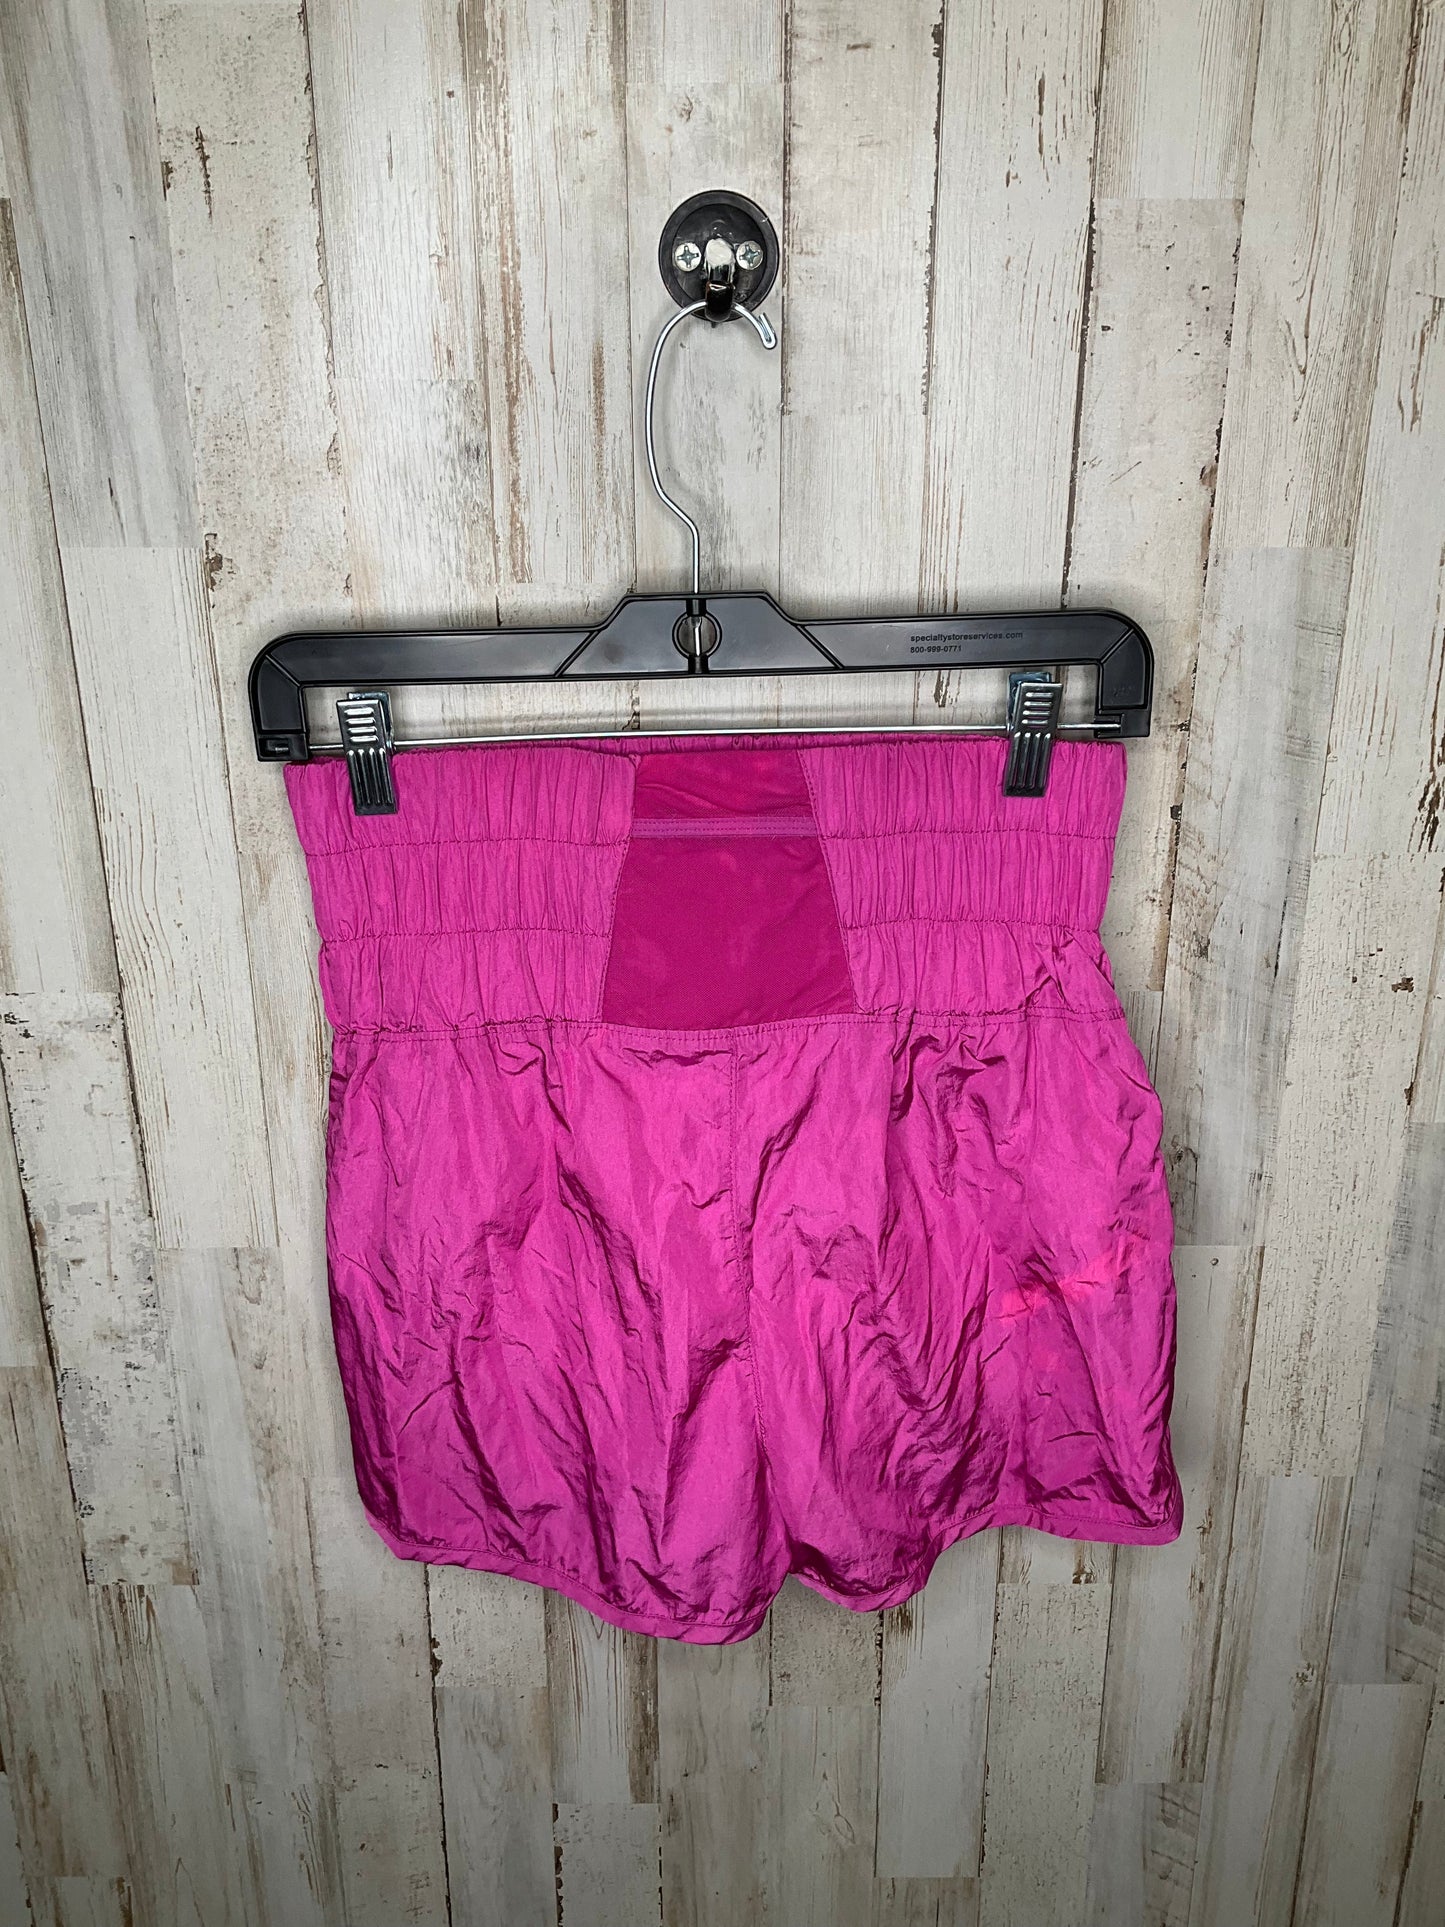 Pink Athletic Shorts Free People, Size S